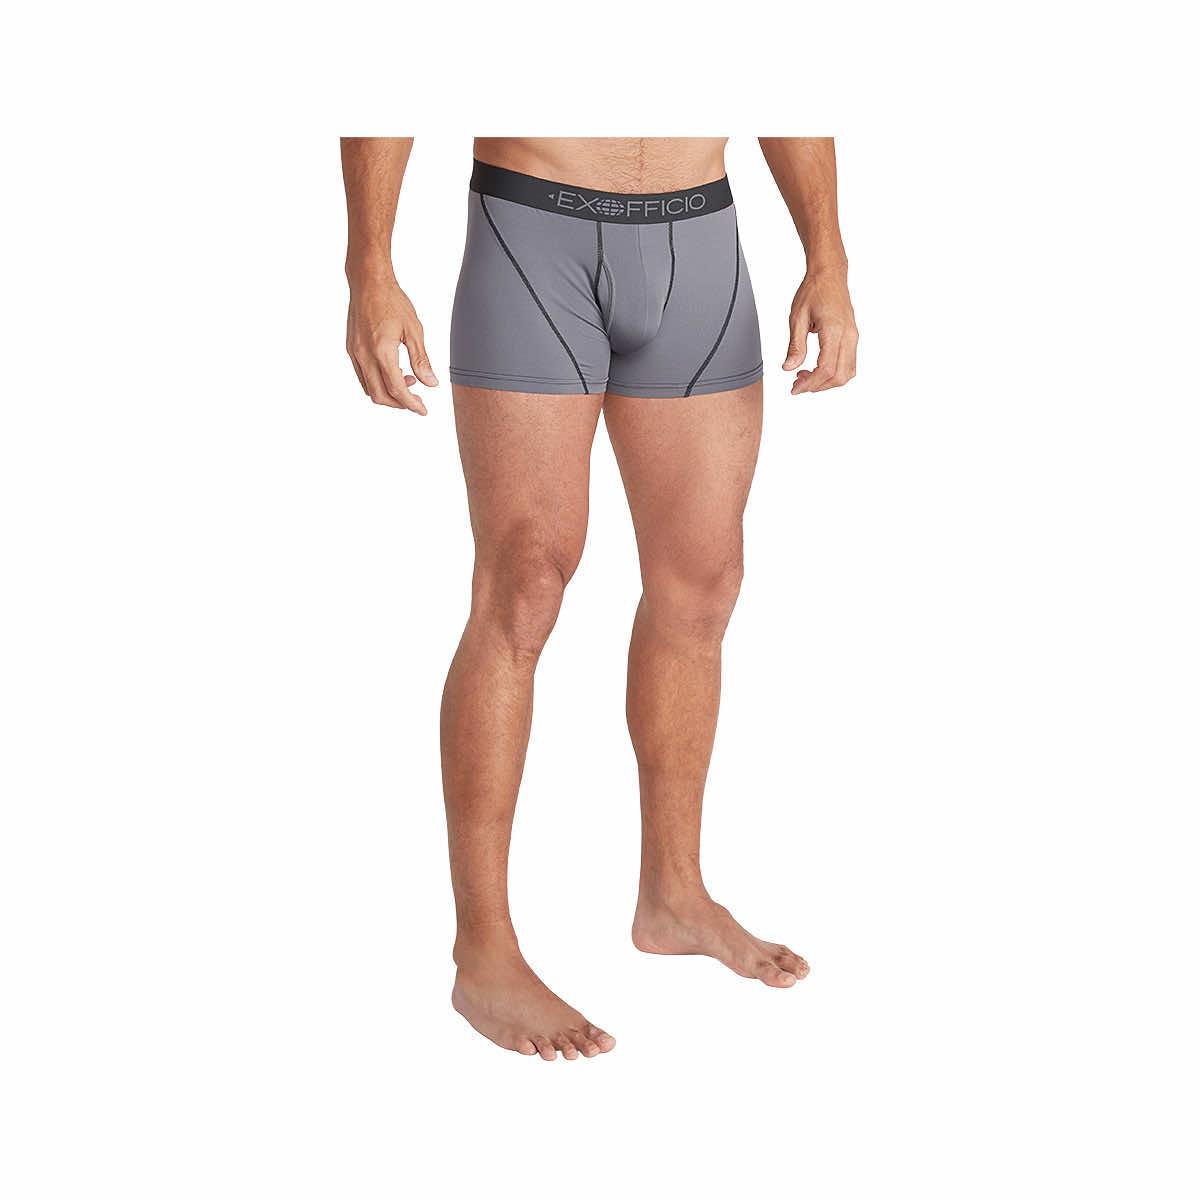 Mast General Store  Men's Give-N-Go 2.0 Sport Boxer Brief - 3 Inch